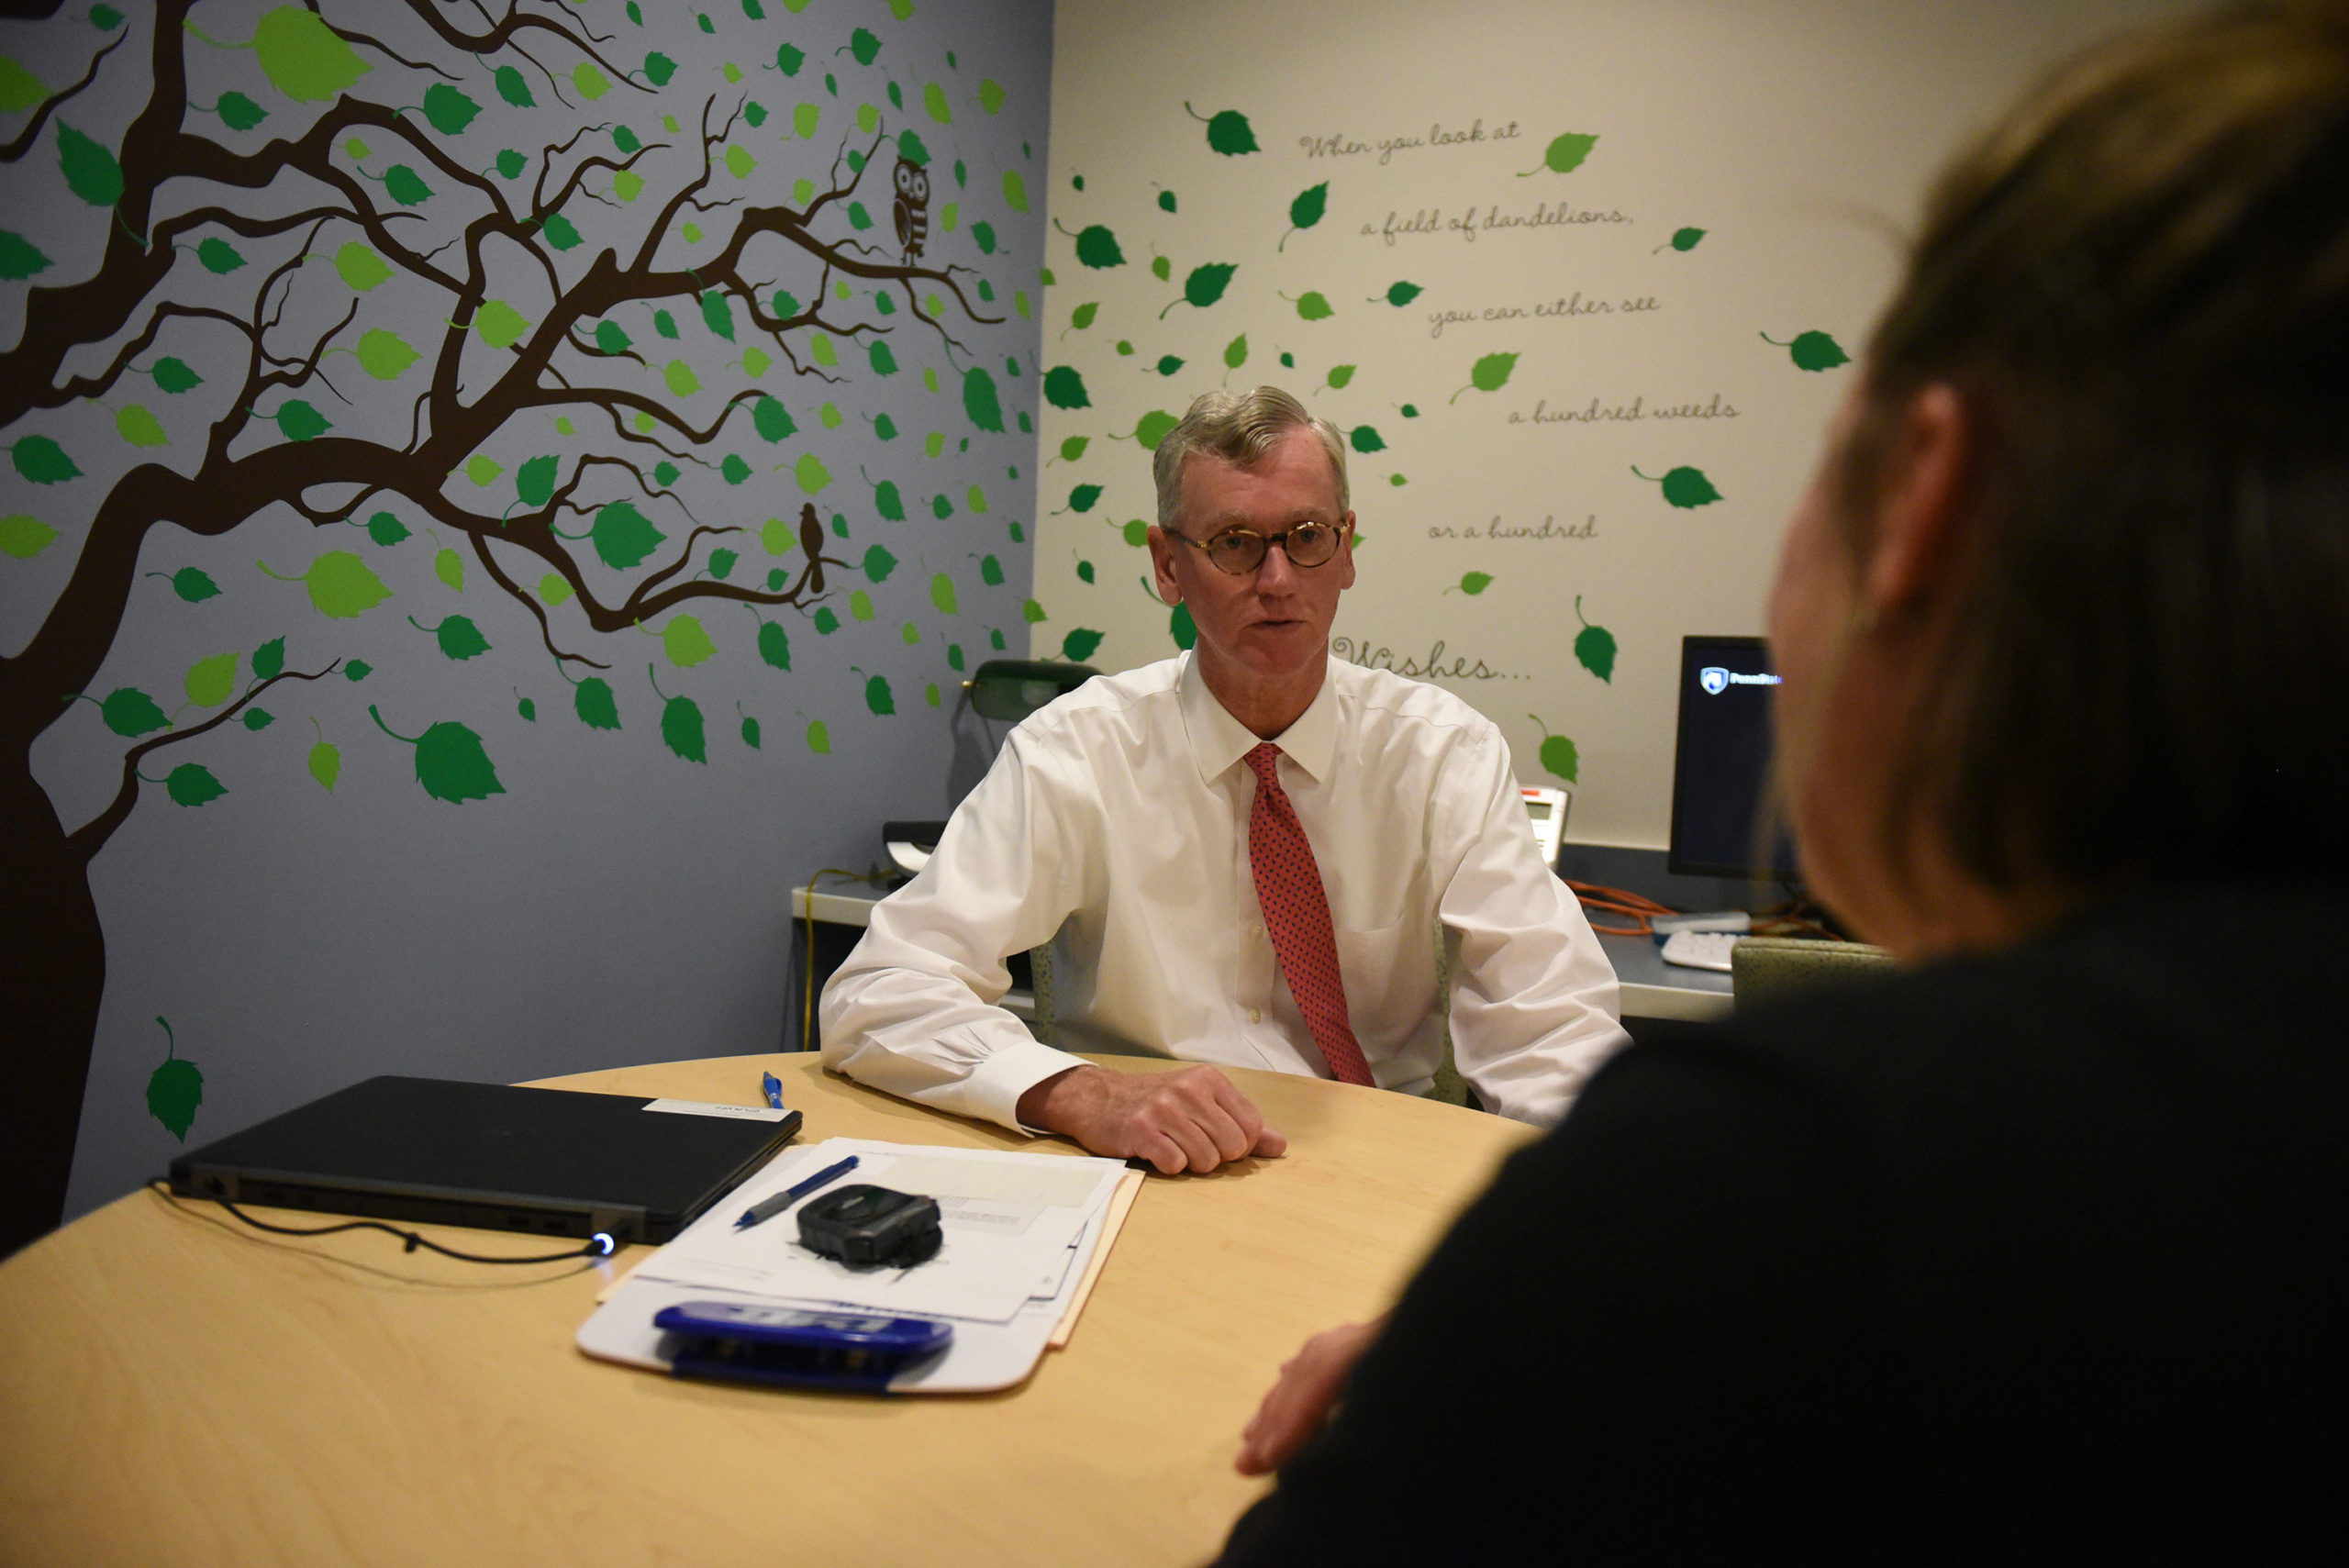 Dr. George Blackall, PsyD, MBA, is seen sitting at table counseling a female patient. He is looking directly at her. The patient Is facing Dr. Blackall and her face is not visible. The room has a decal of a tree on its walls.